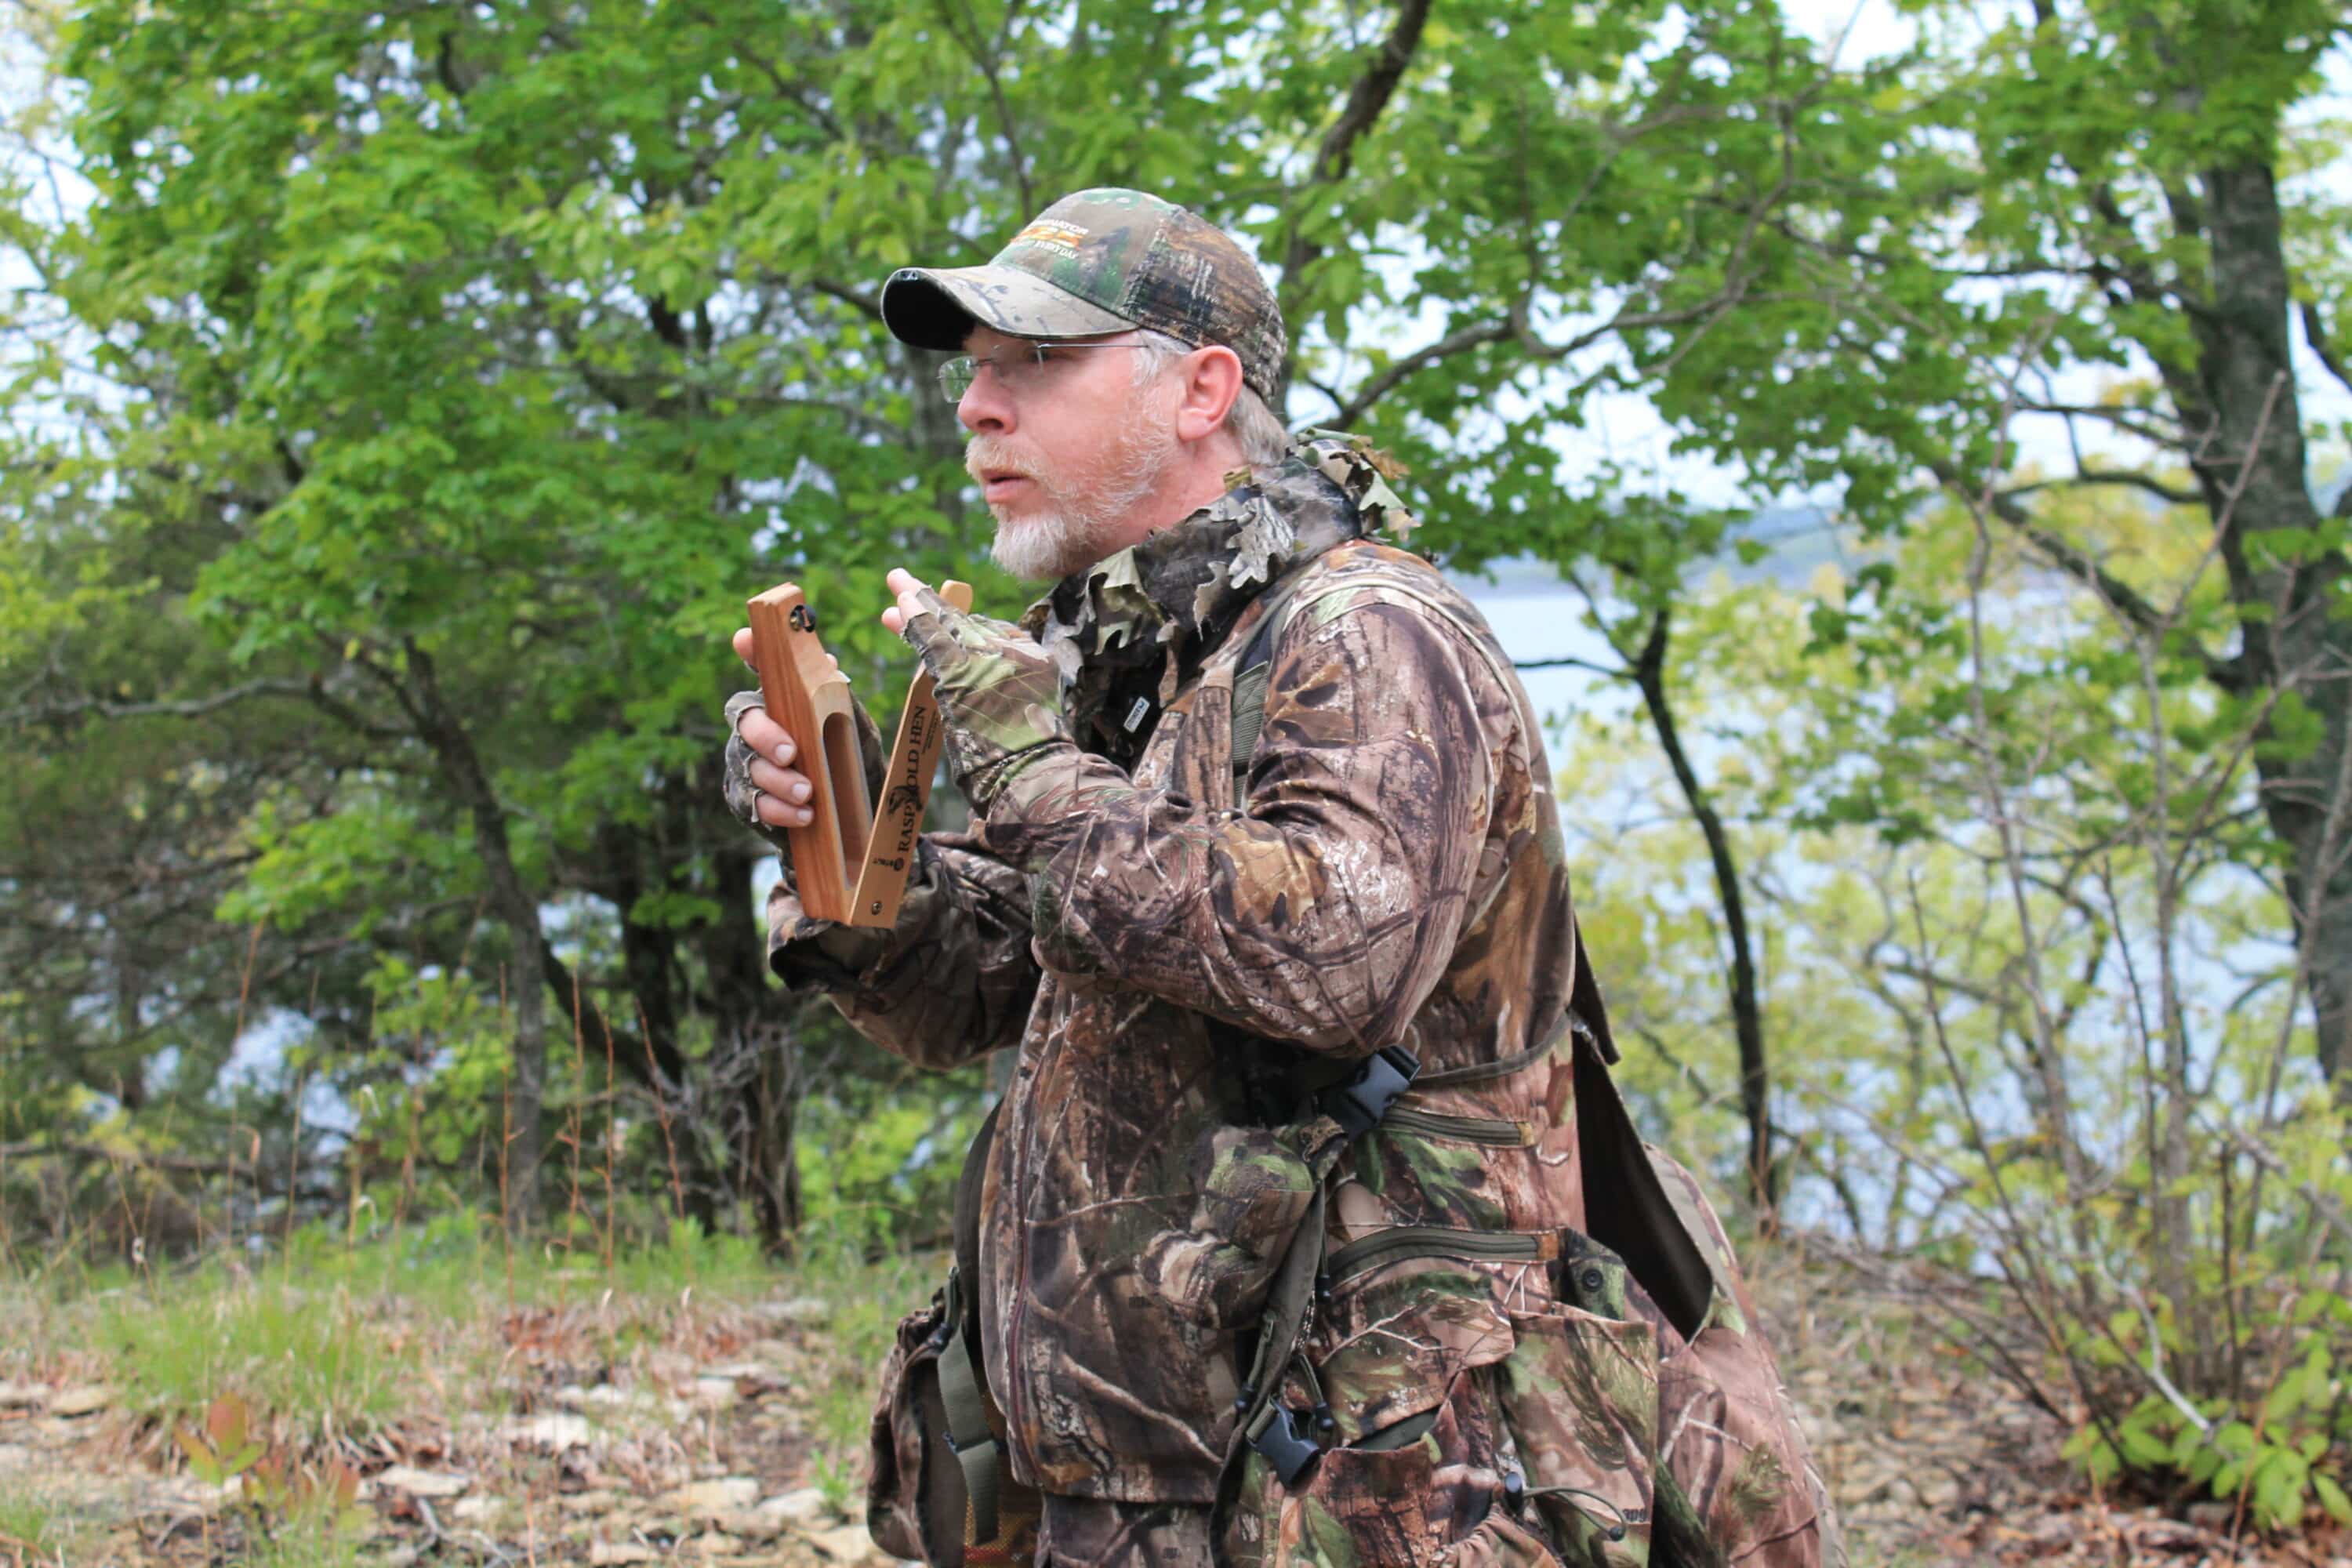 Merriam's turkeys sound different. Use calls that can mimic their accents.